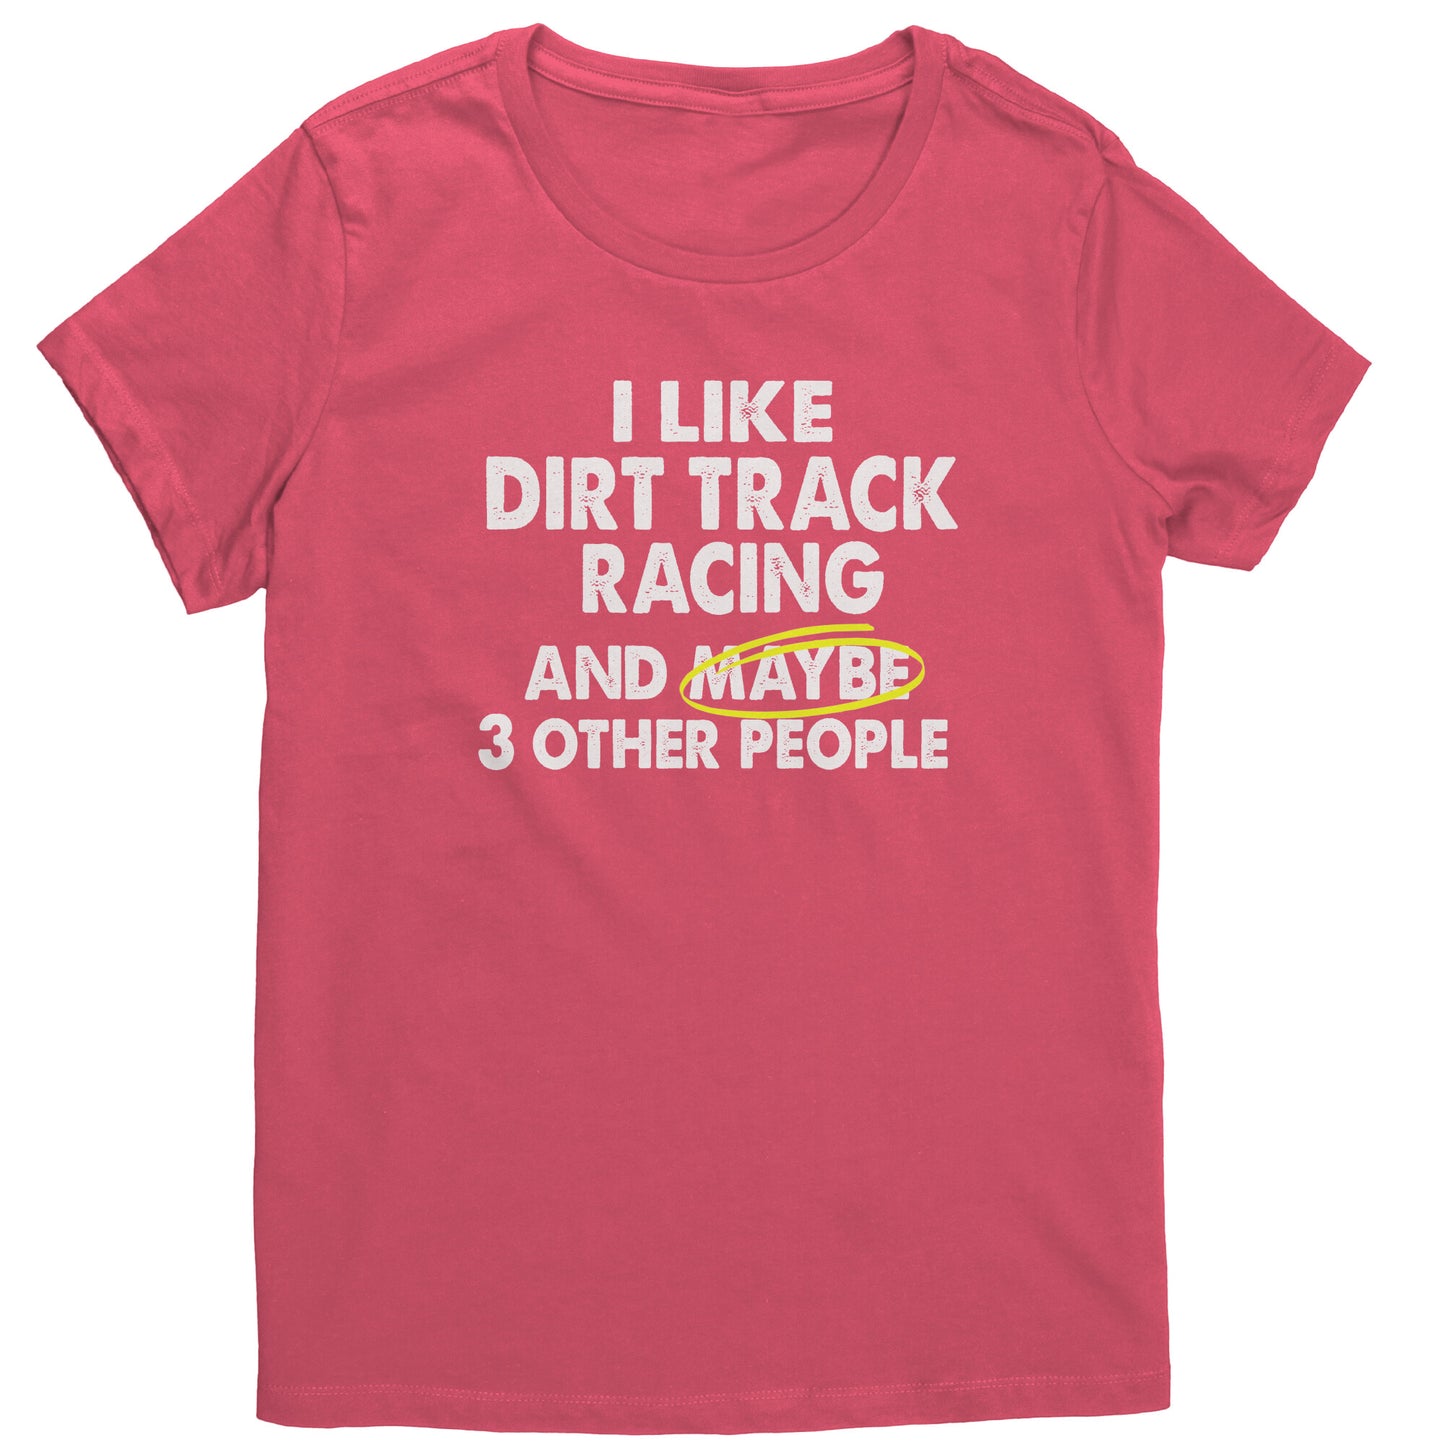 I LIKE DIRT RACING AND MAYBE 3 OTHER PEOPLE WOMEN'S T-SHIRT